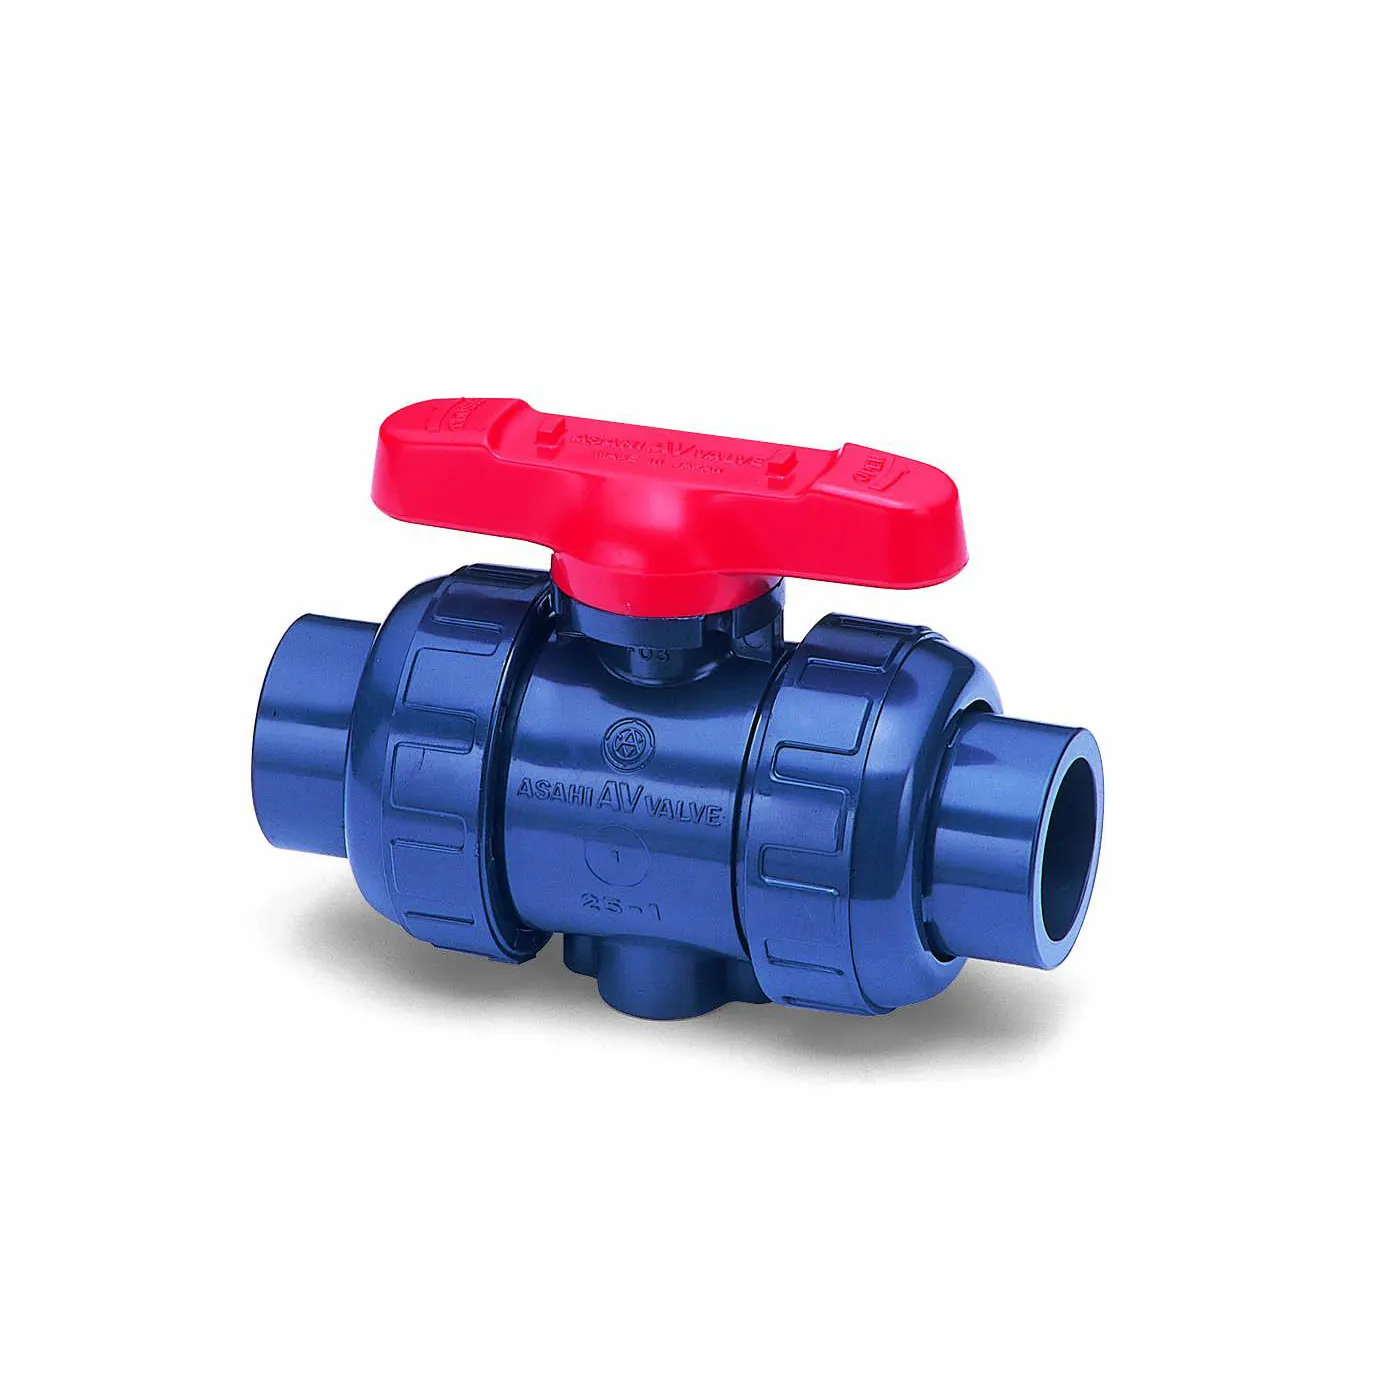 normal temperature general adjustable valves plastic piping fittings